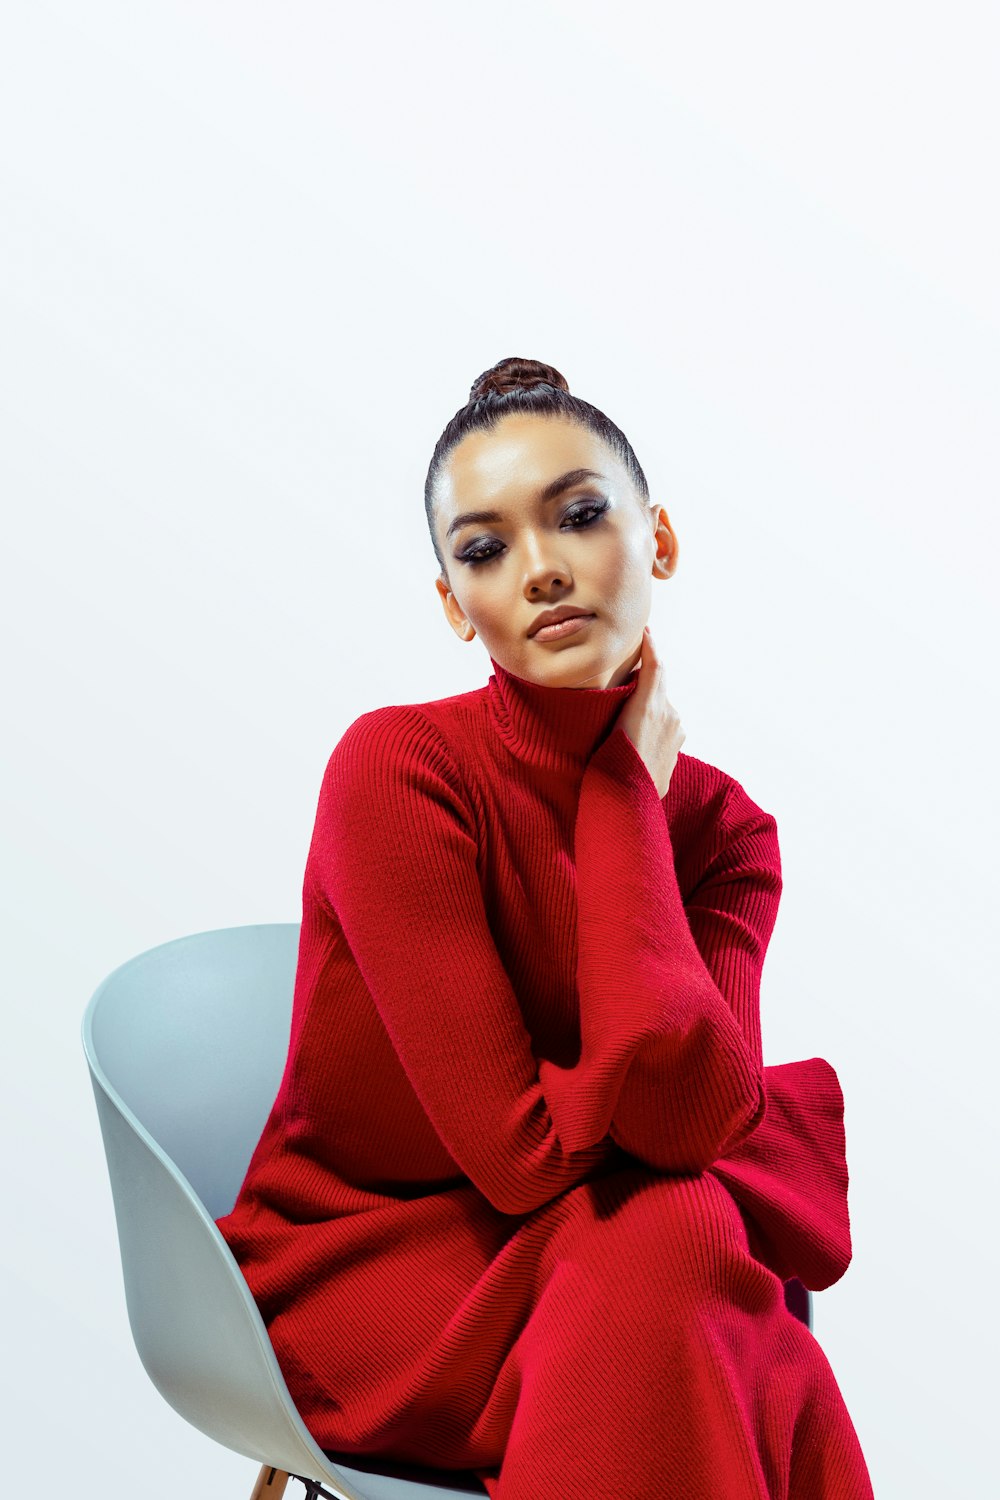 a woman in a red sweater sitting on a chair